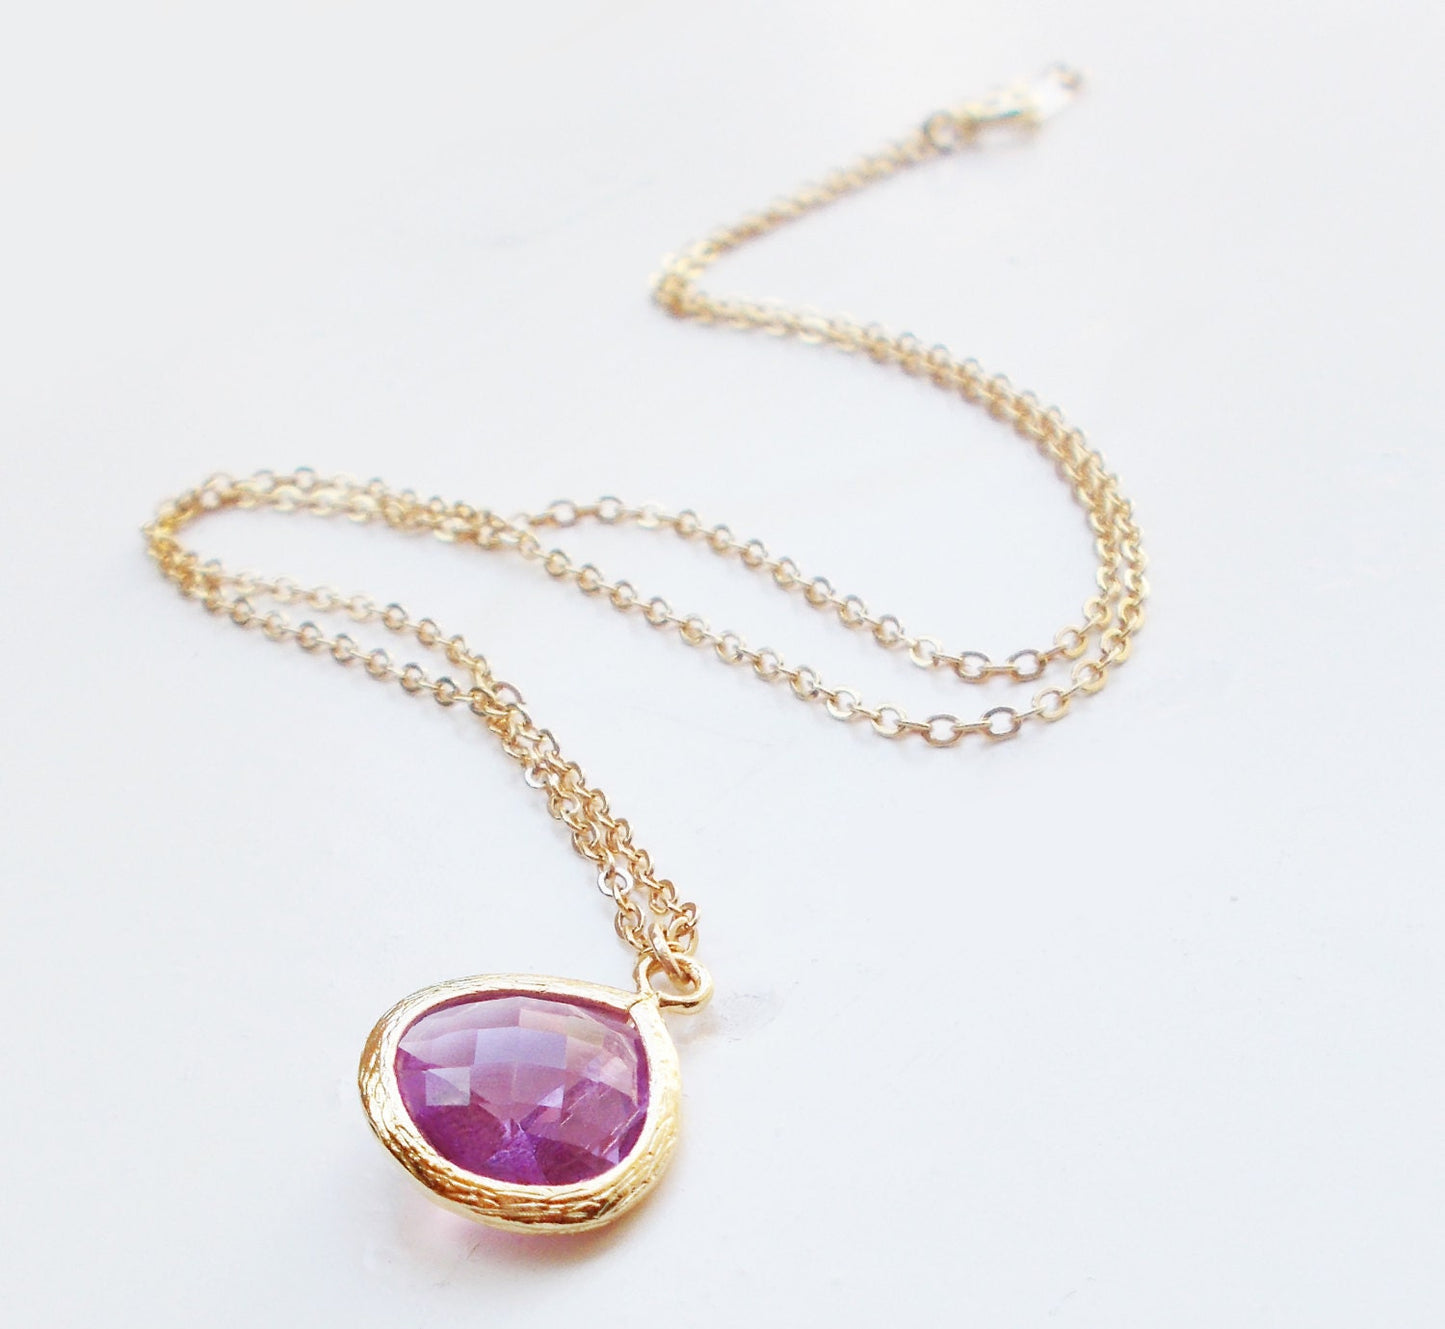 Lavender Teardrop Necklace - Simple Gold Lavender Pendant Necklace - GIFT FOR HER - BridesMaid Gift - Gemstone Necklace